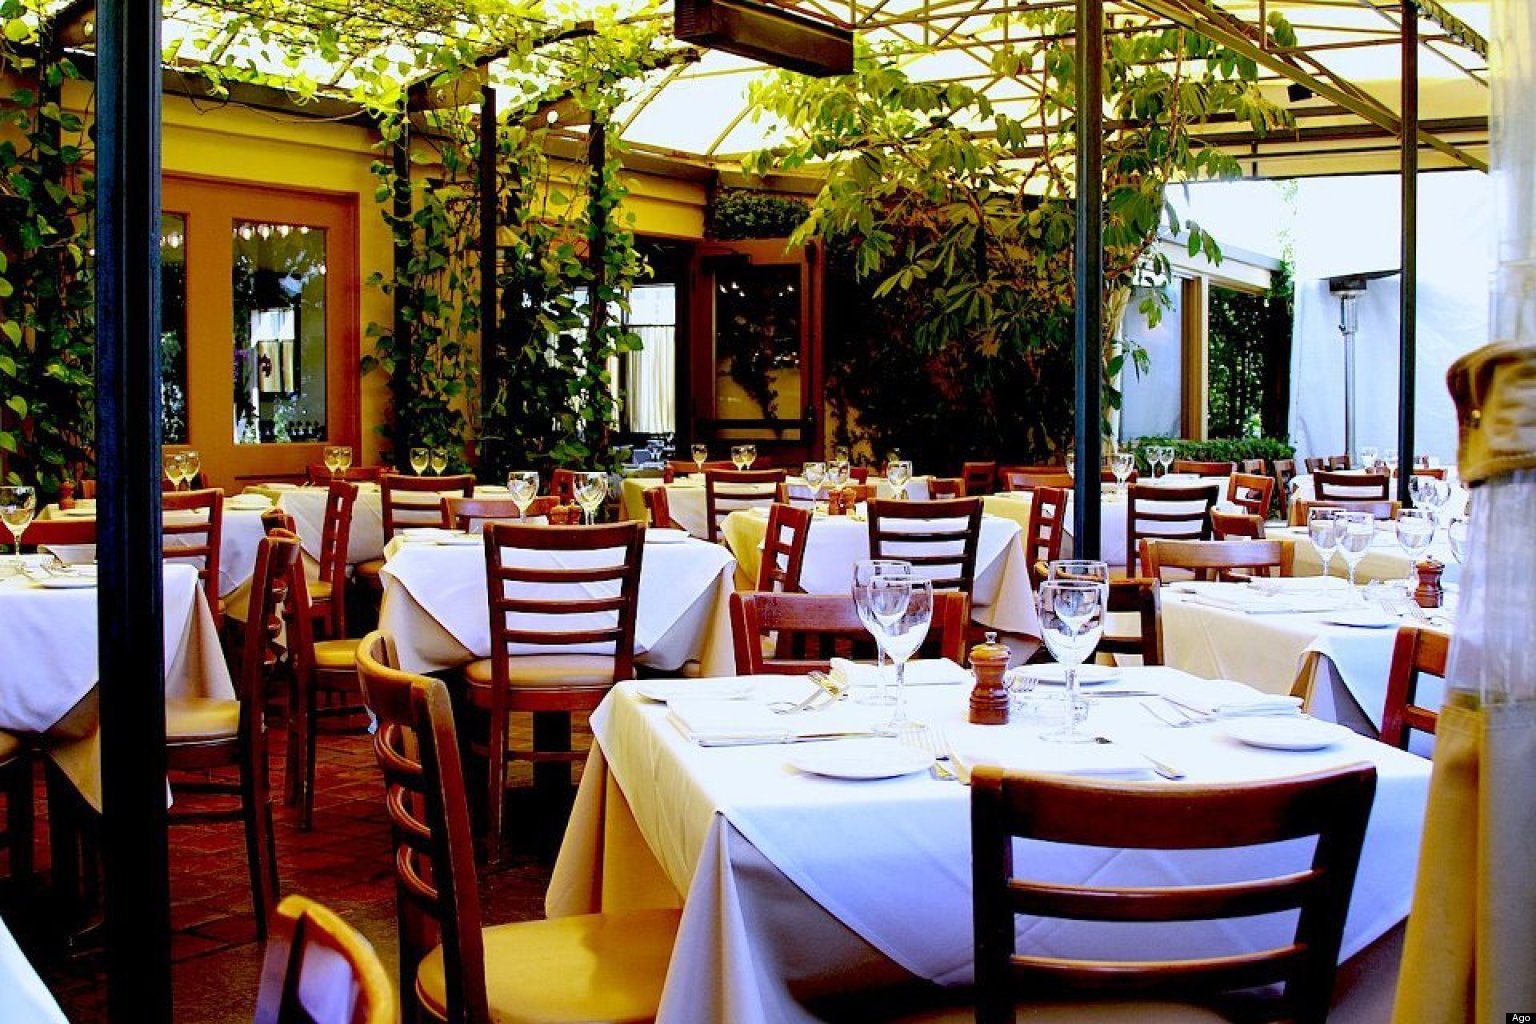 Hollywood Power Lunch: Top LA Restaurants Where You Can Flex Some